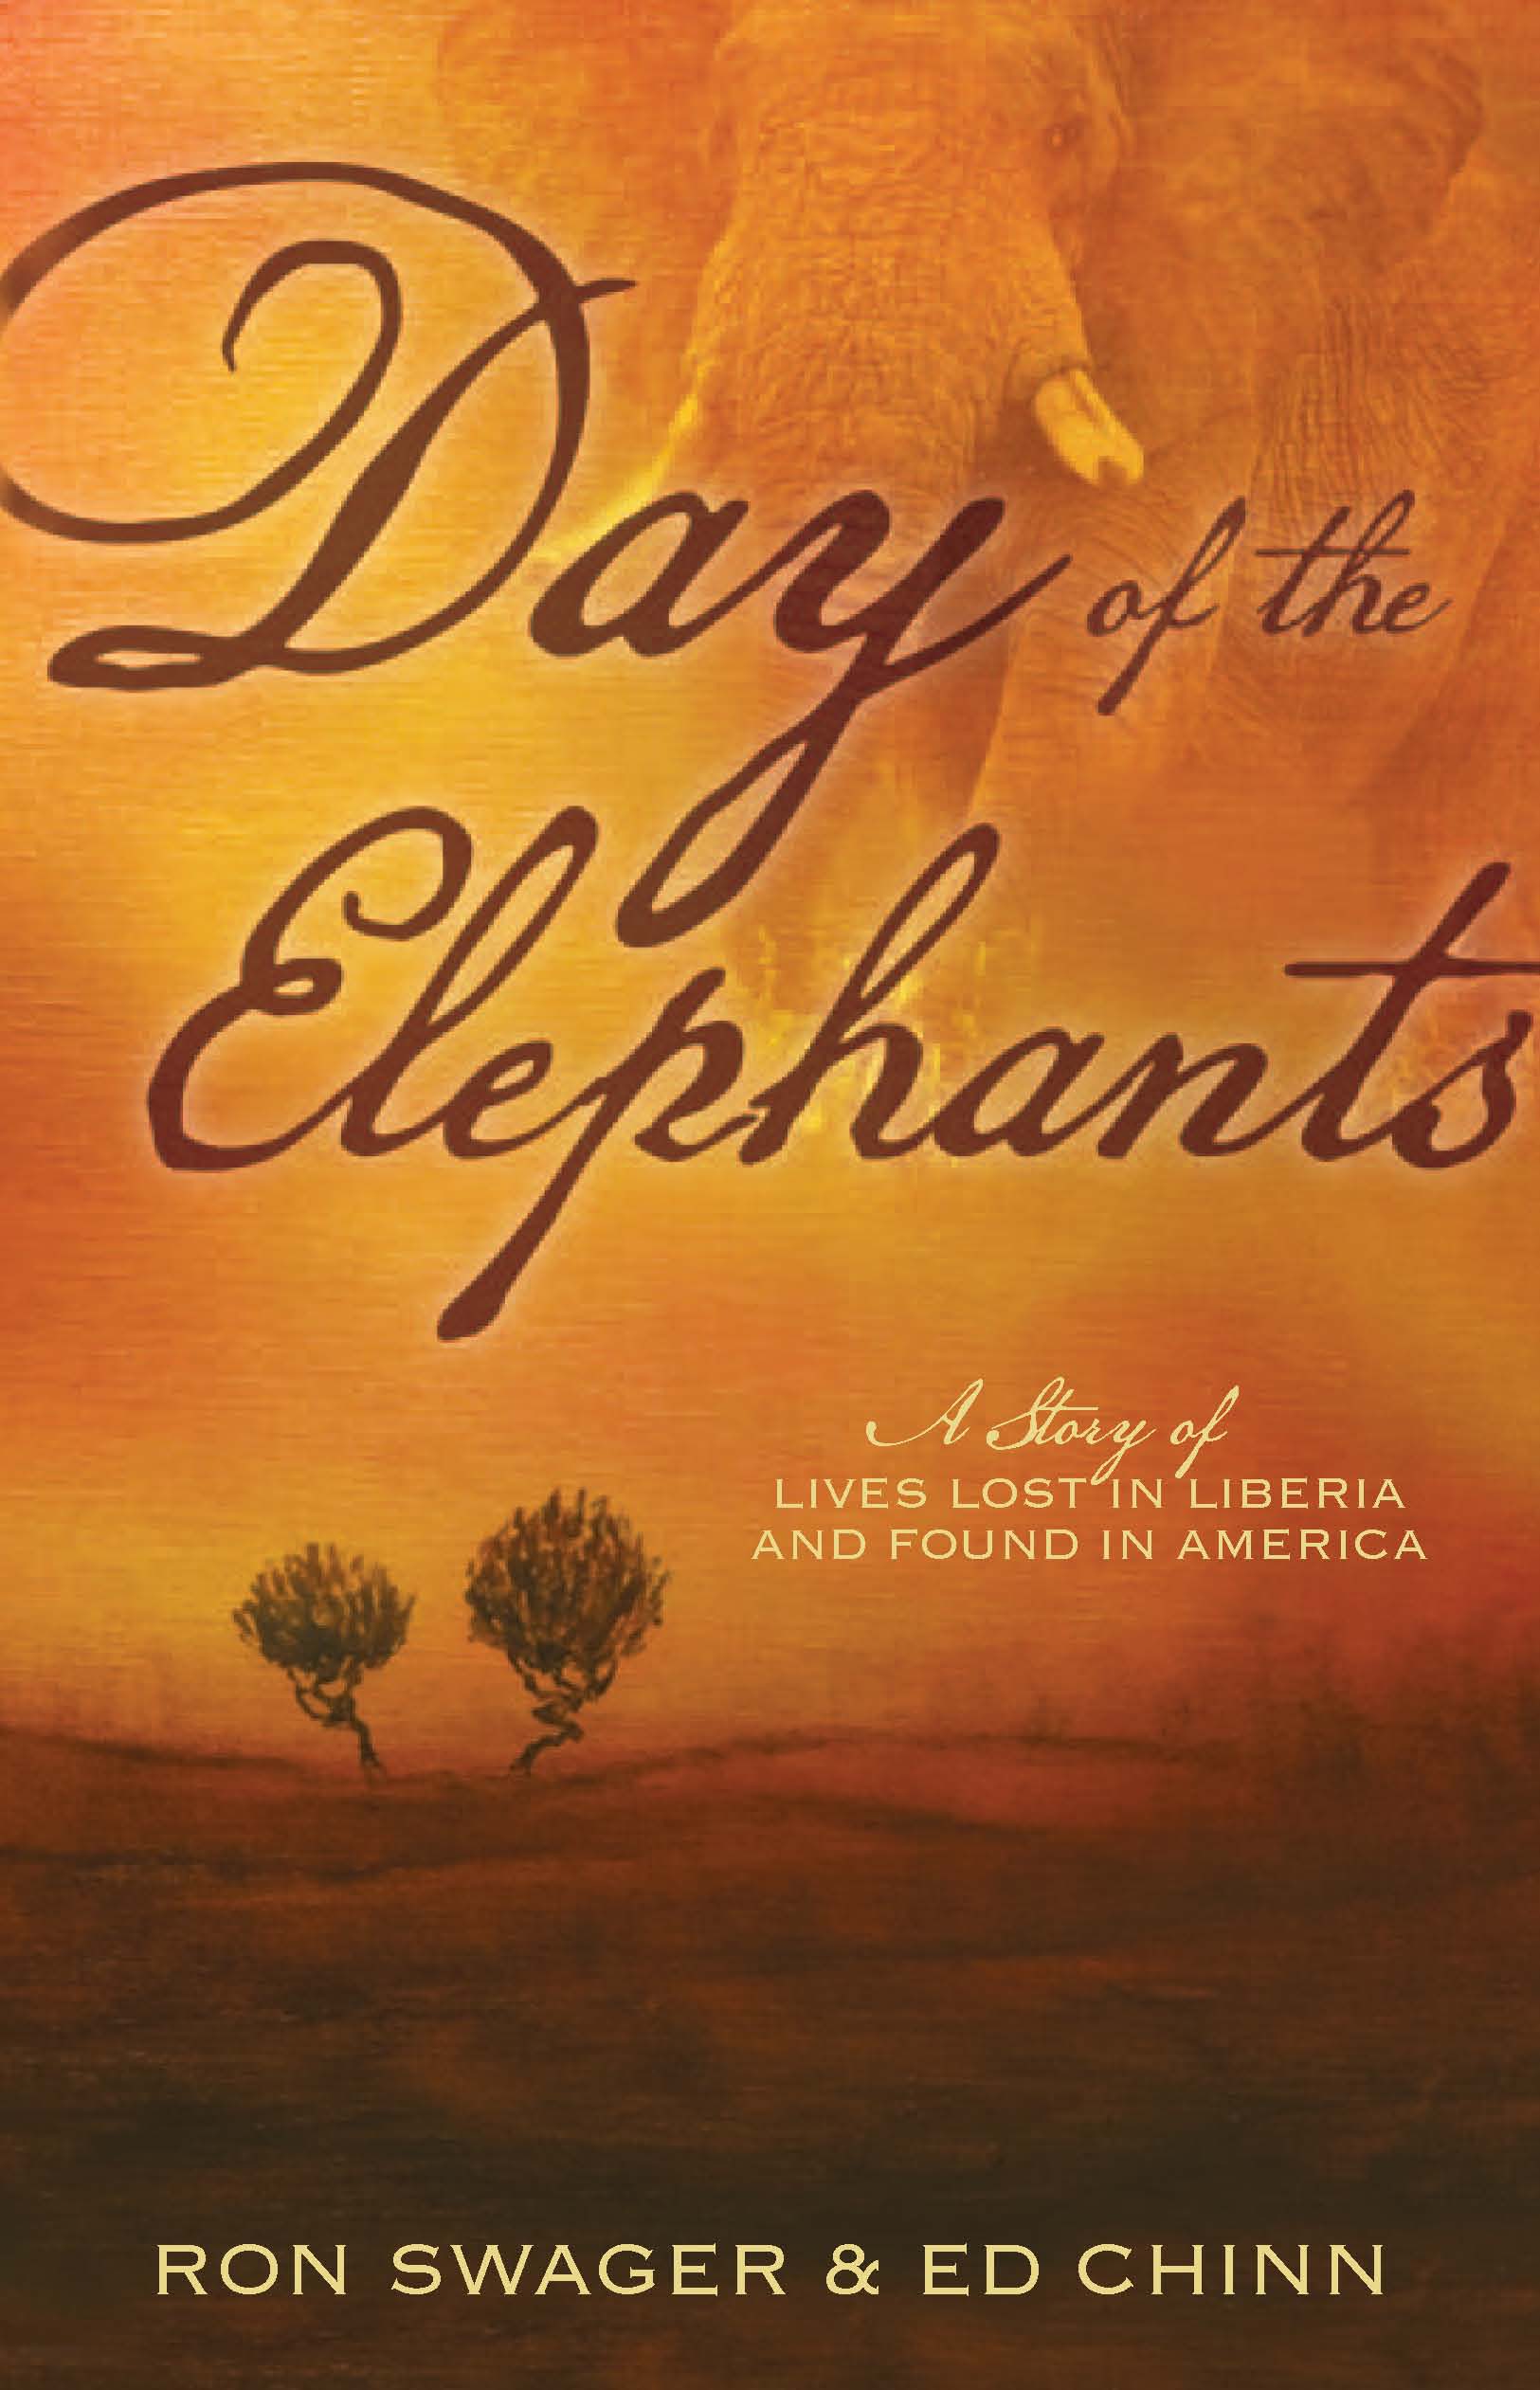 Day of the Elephants